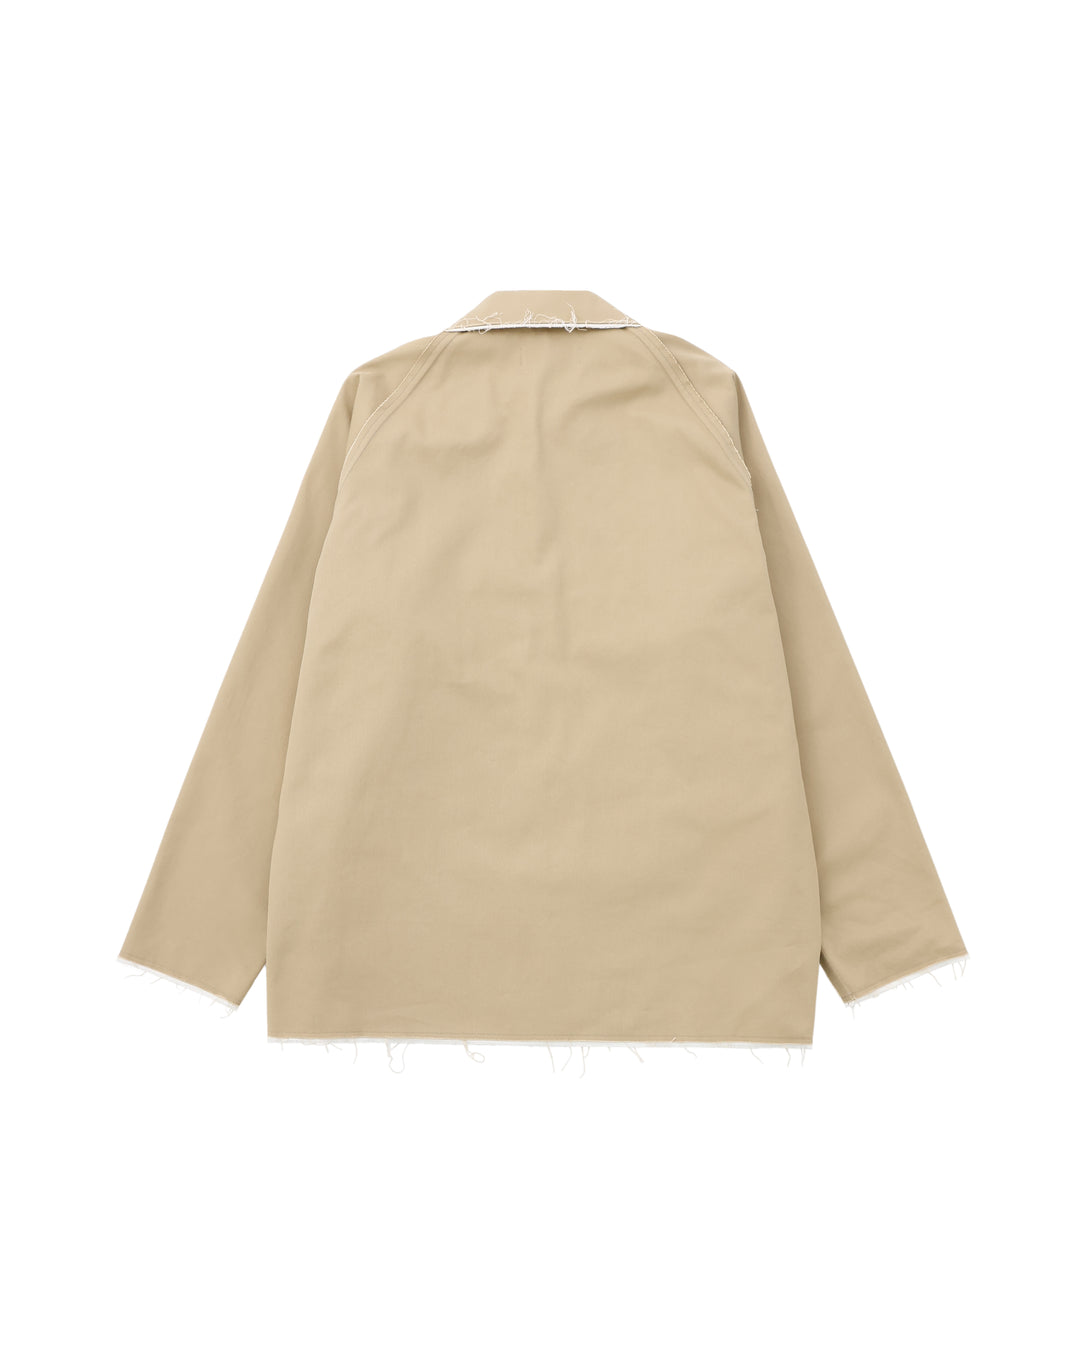 Inside Out Drill Jackets / Beige